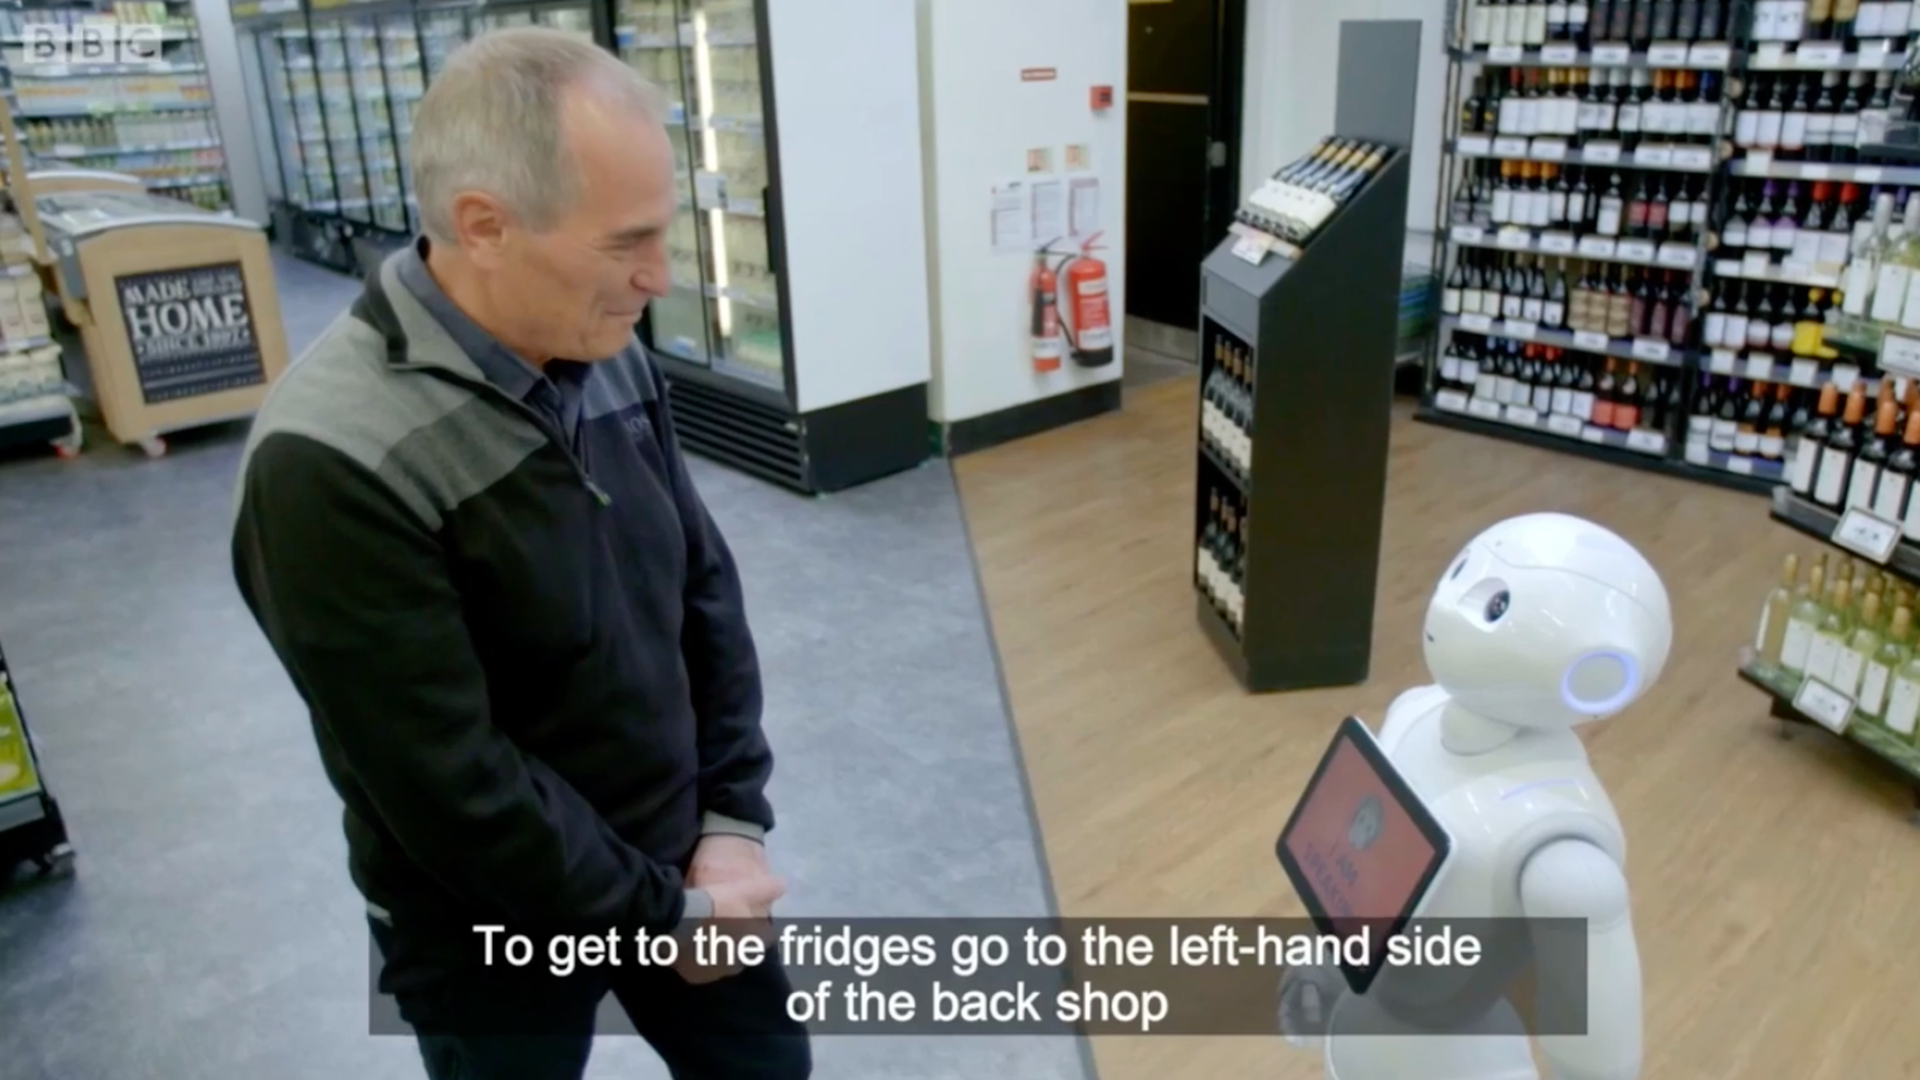 Scottish Grocery Store “Fires” Robot Employee